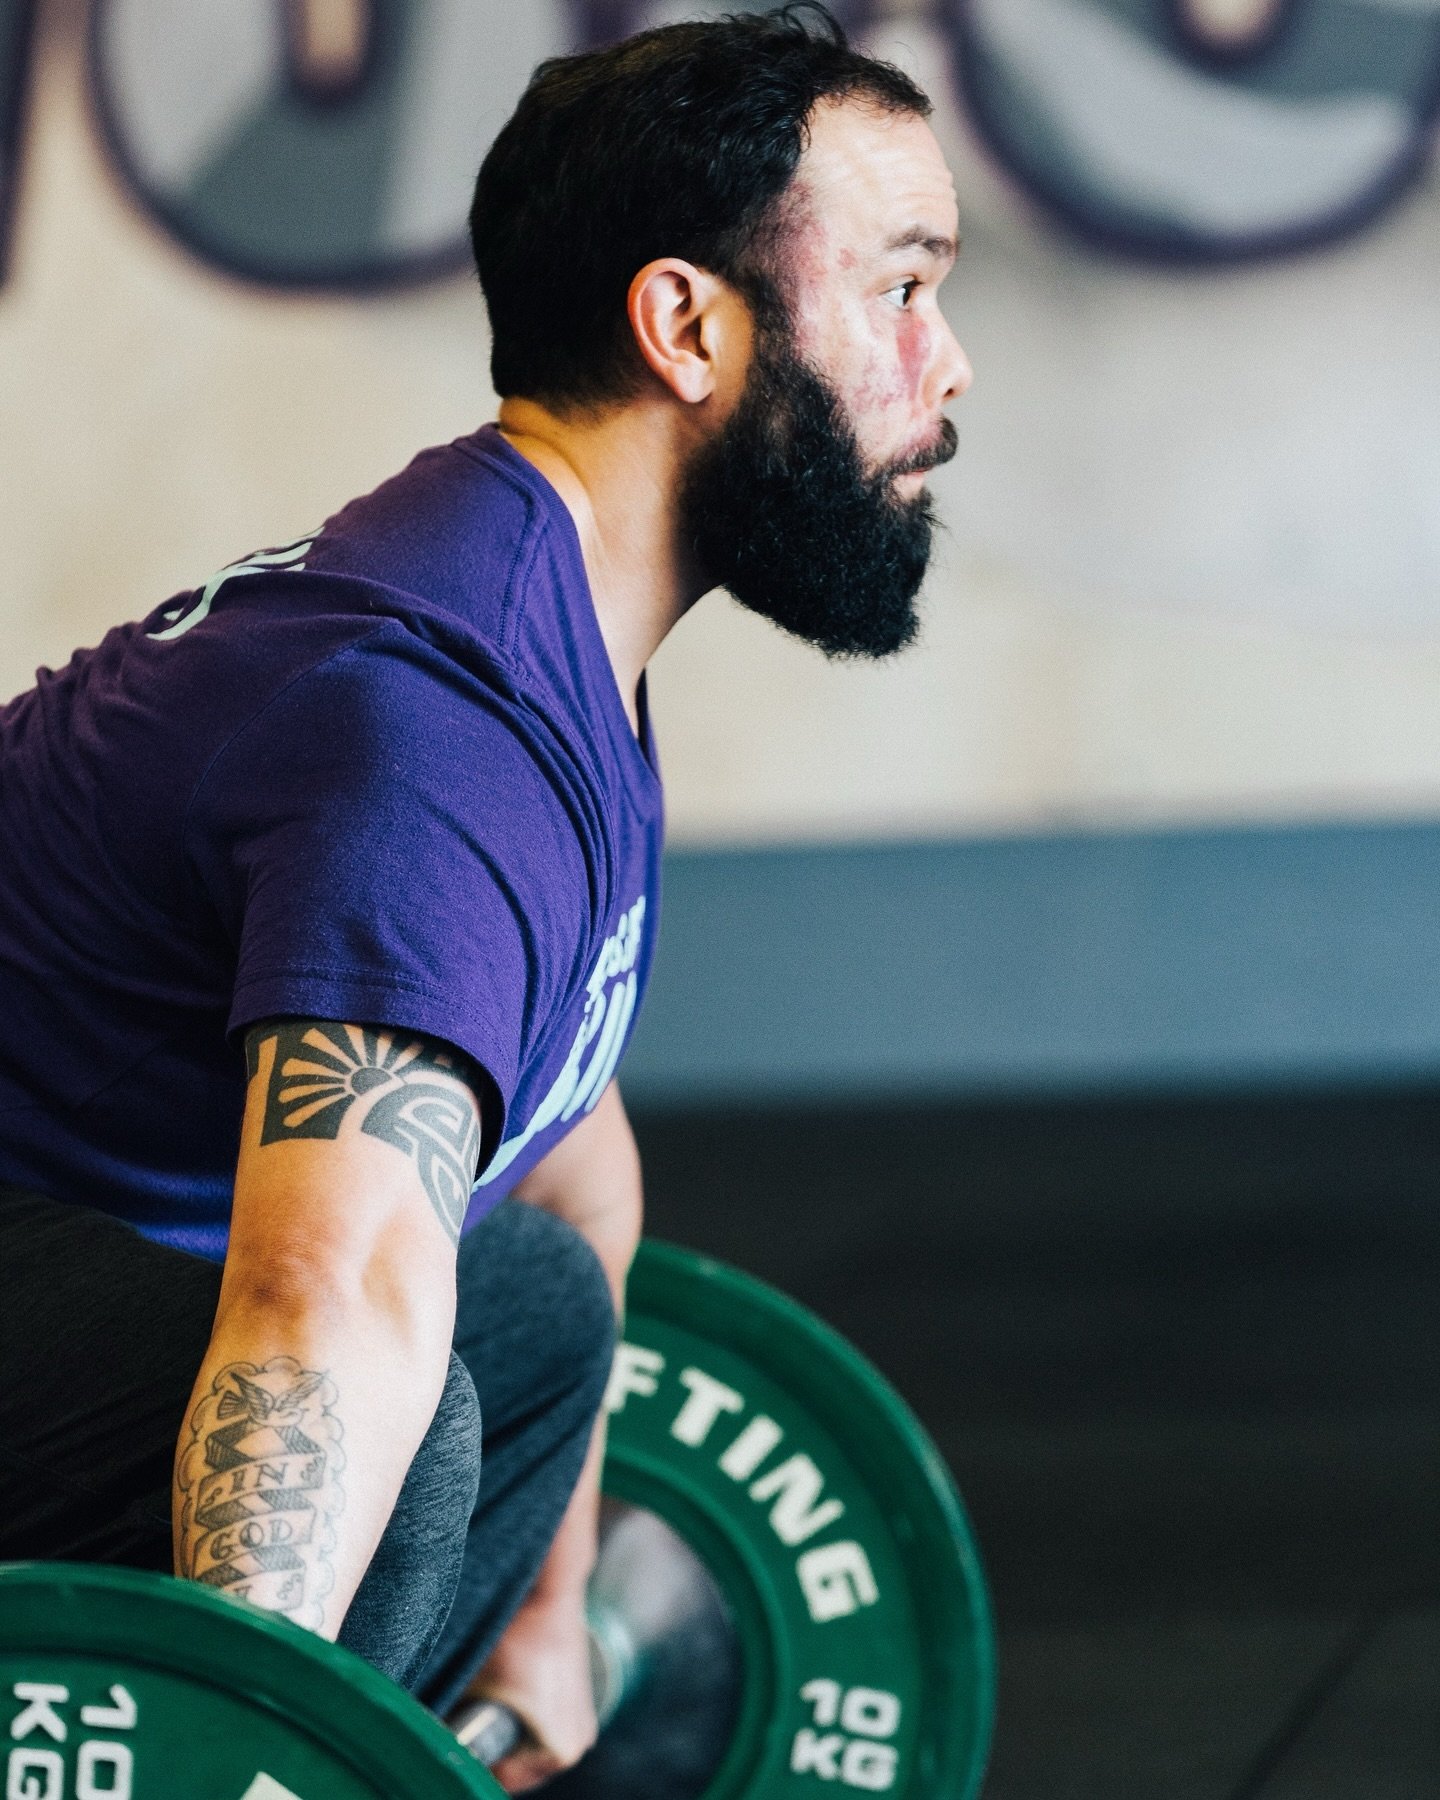 Big announcement coming soon from CrossFit Risio and @nate_rho88 👀

Stay tuned later this week.